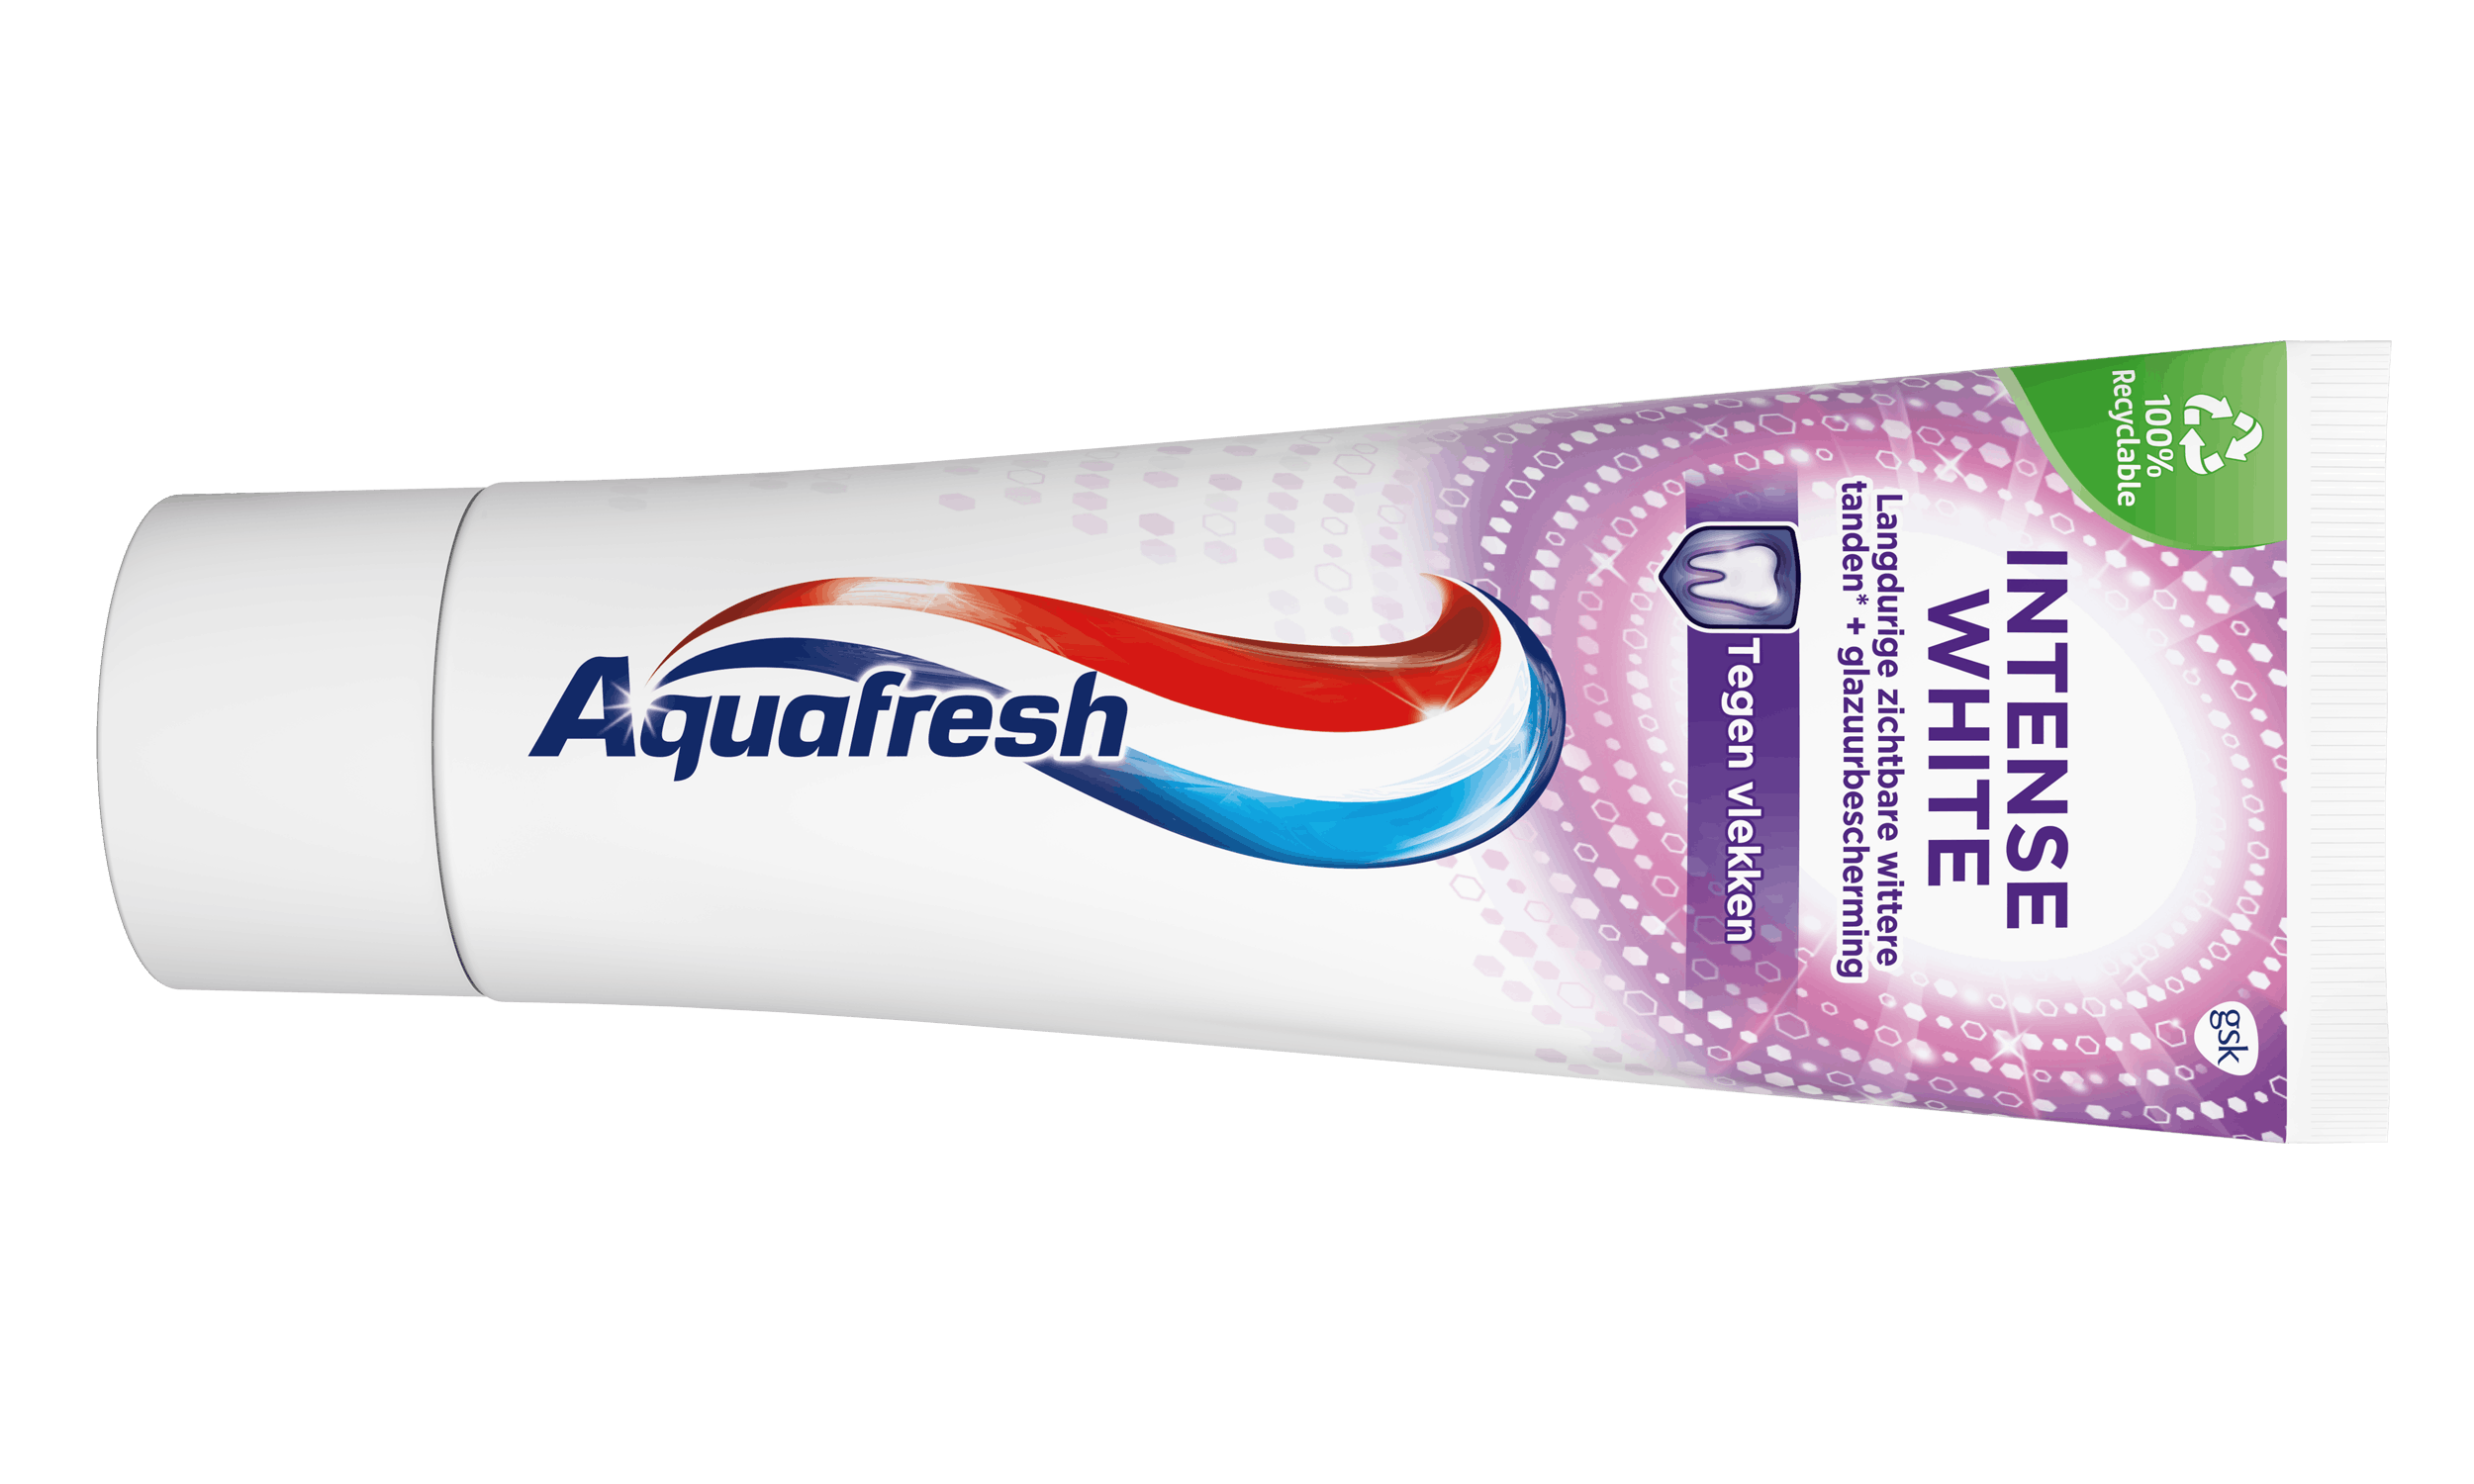 Aquafresh Intense White toothpaste grey packaging with purple accent.